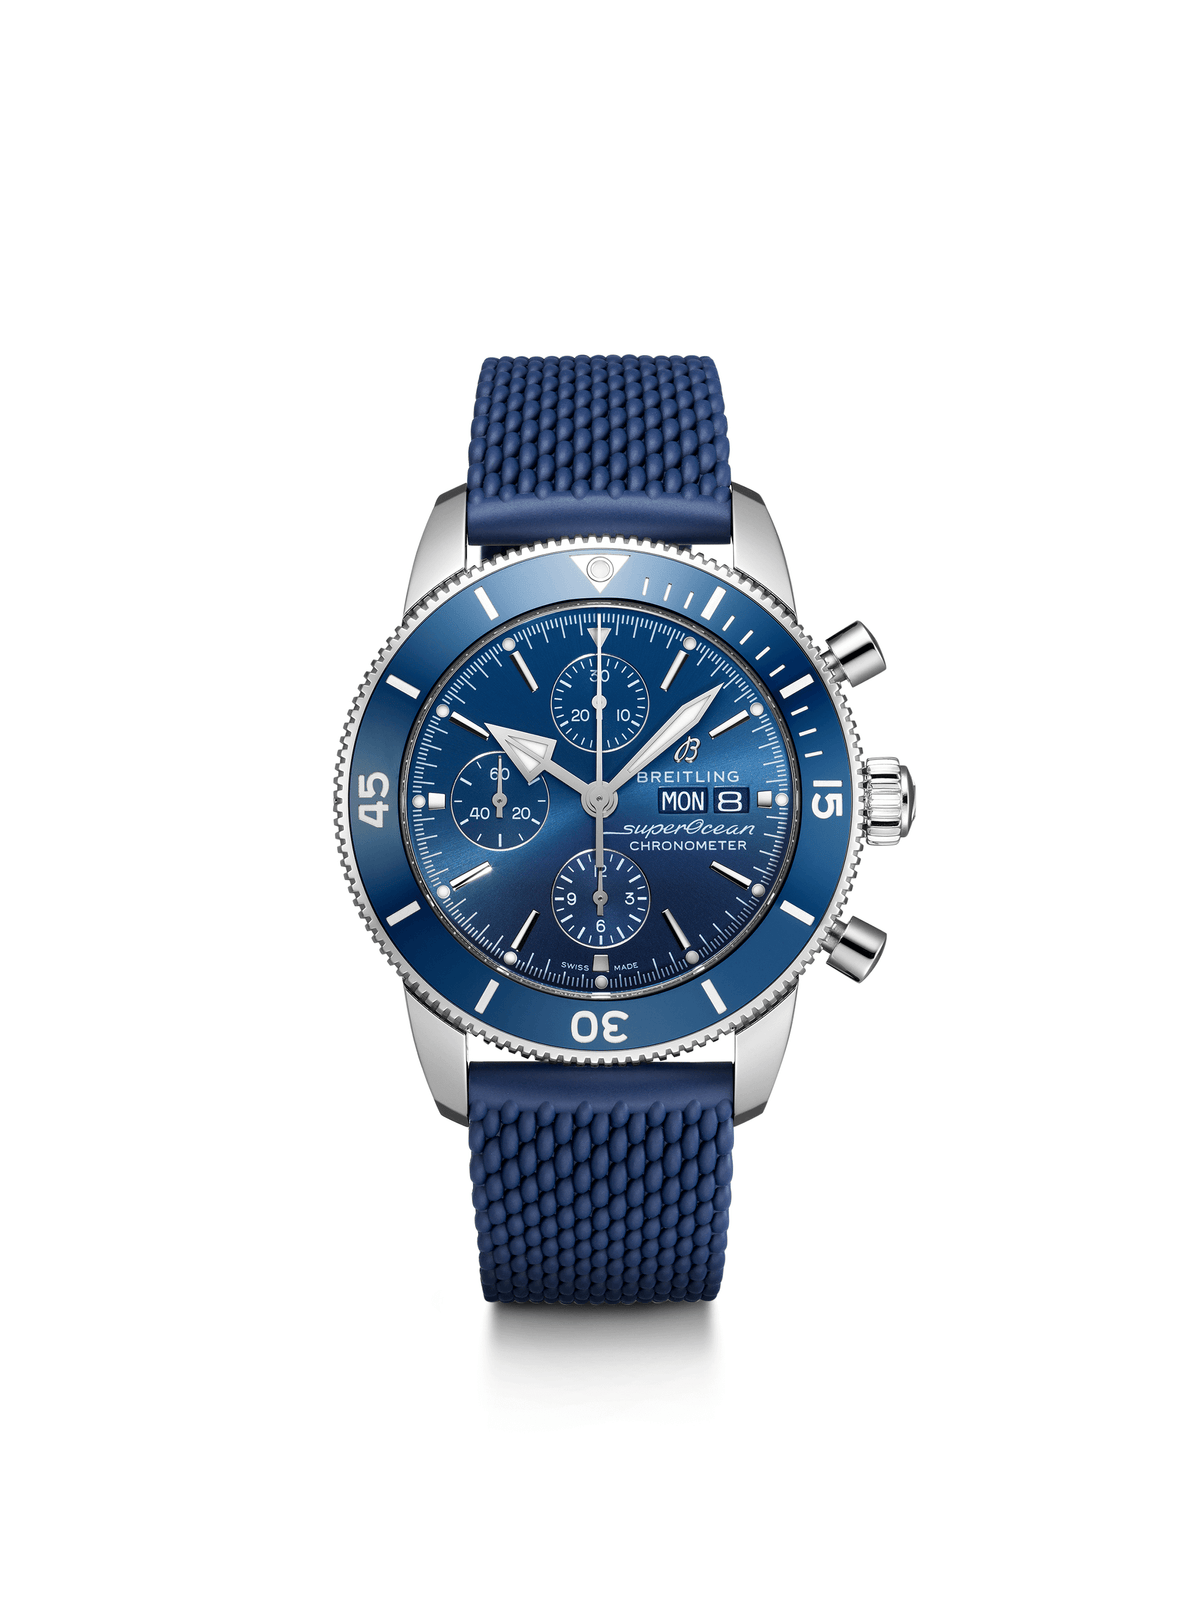 Breitling Superocean Heritage Chronograph Watch 44mm A13313161C1S1